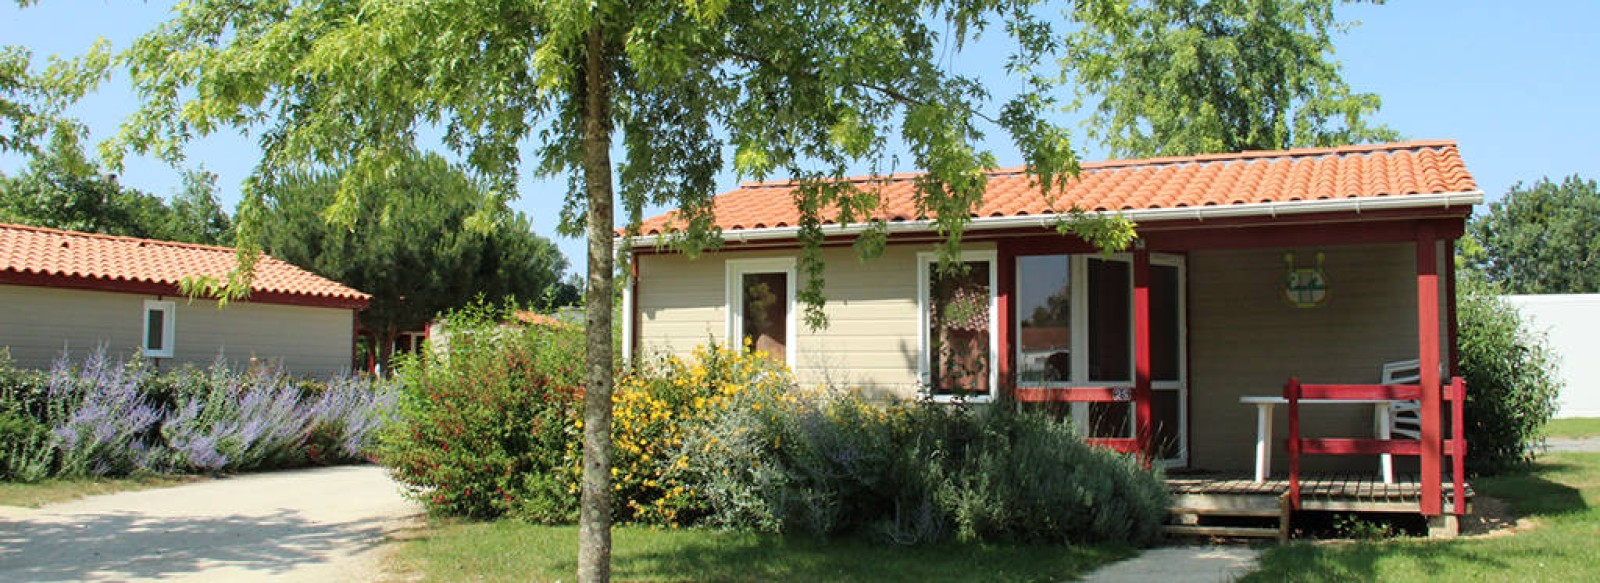 CAMPING RESIDENCE LA RIVIERE